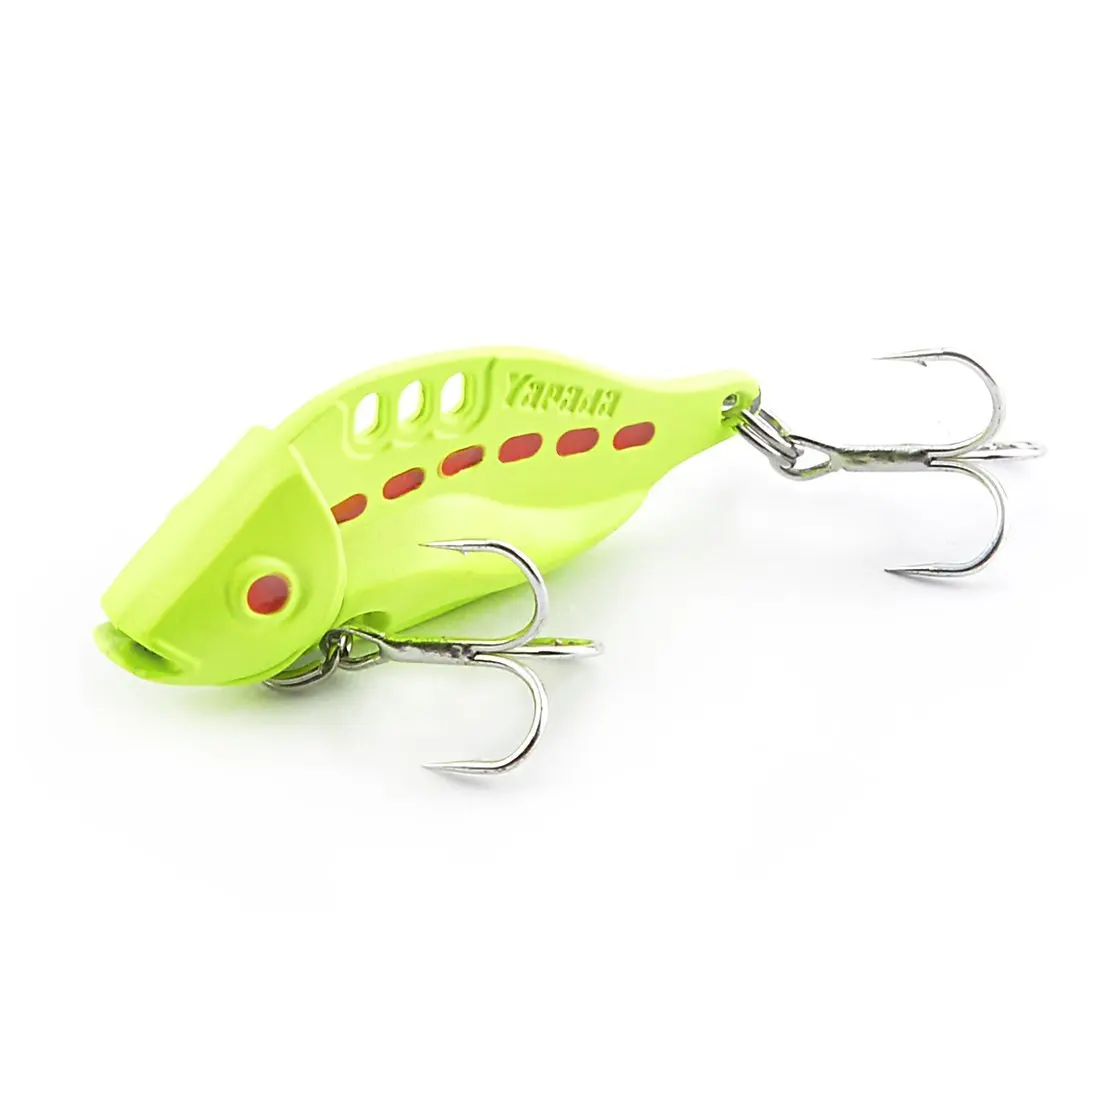 Cheap Walleye Spinner Baits, find Walleye Spinner Baits deals on line at Alibaba.com